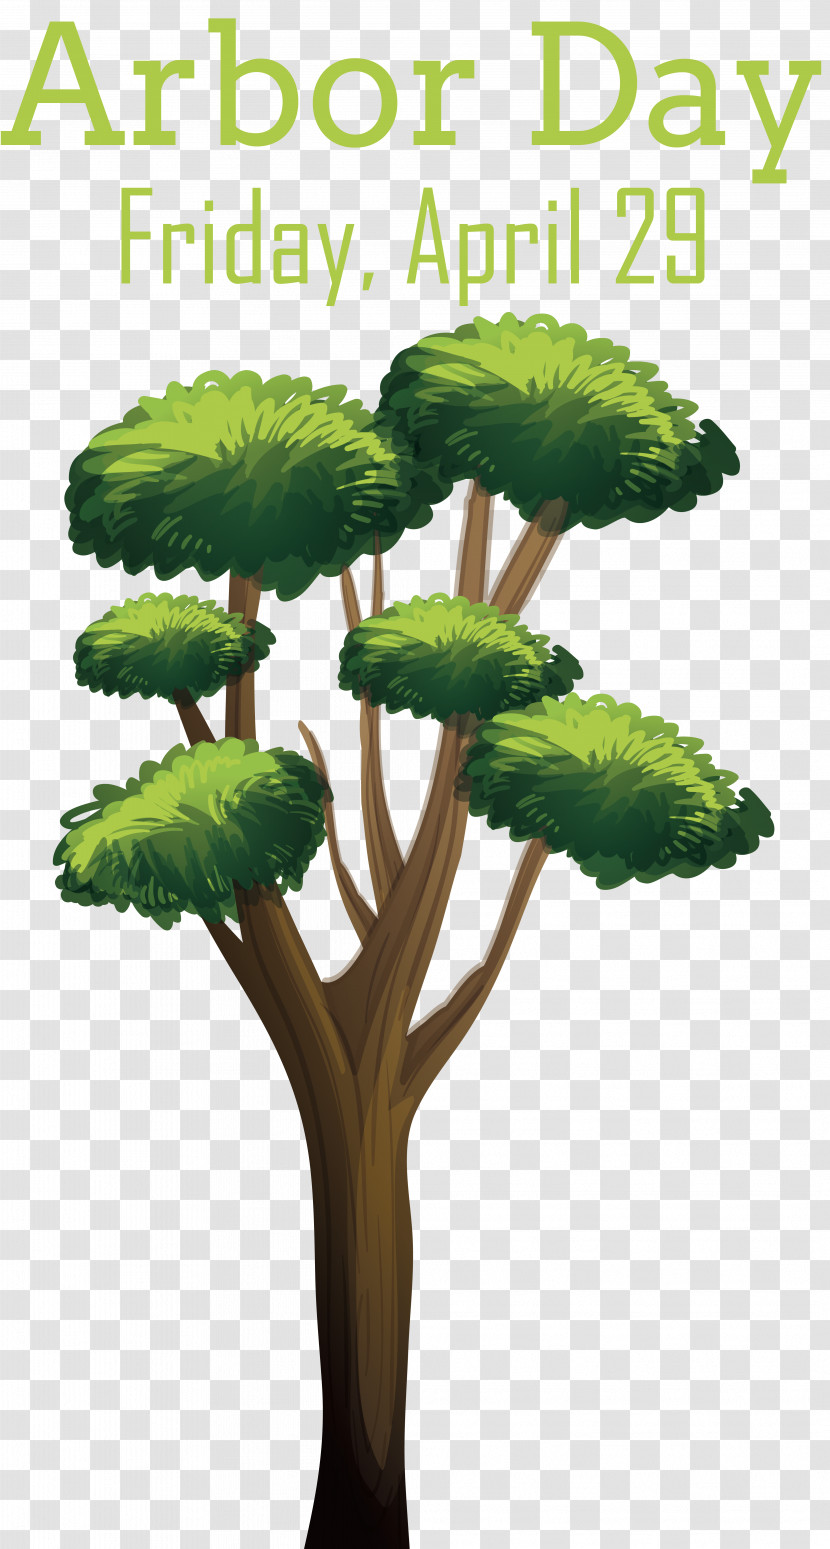 Royalty-free Tree Pixers Branch Vector Transparent PNG